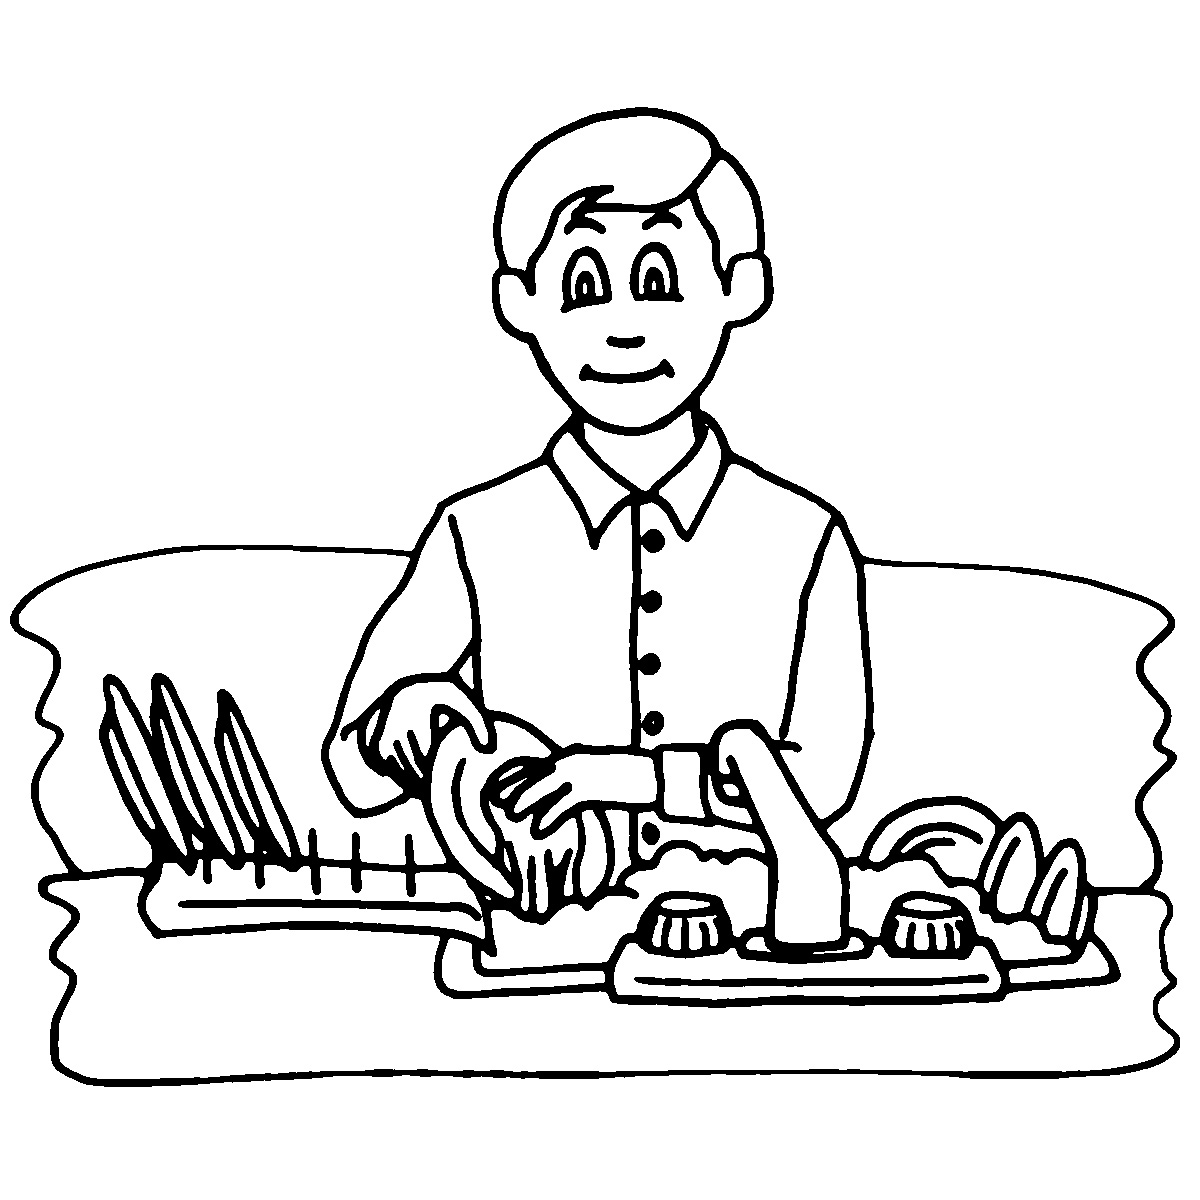 Washing Dishes Clip Art Black and White